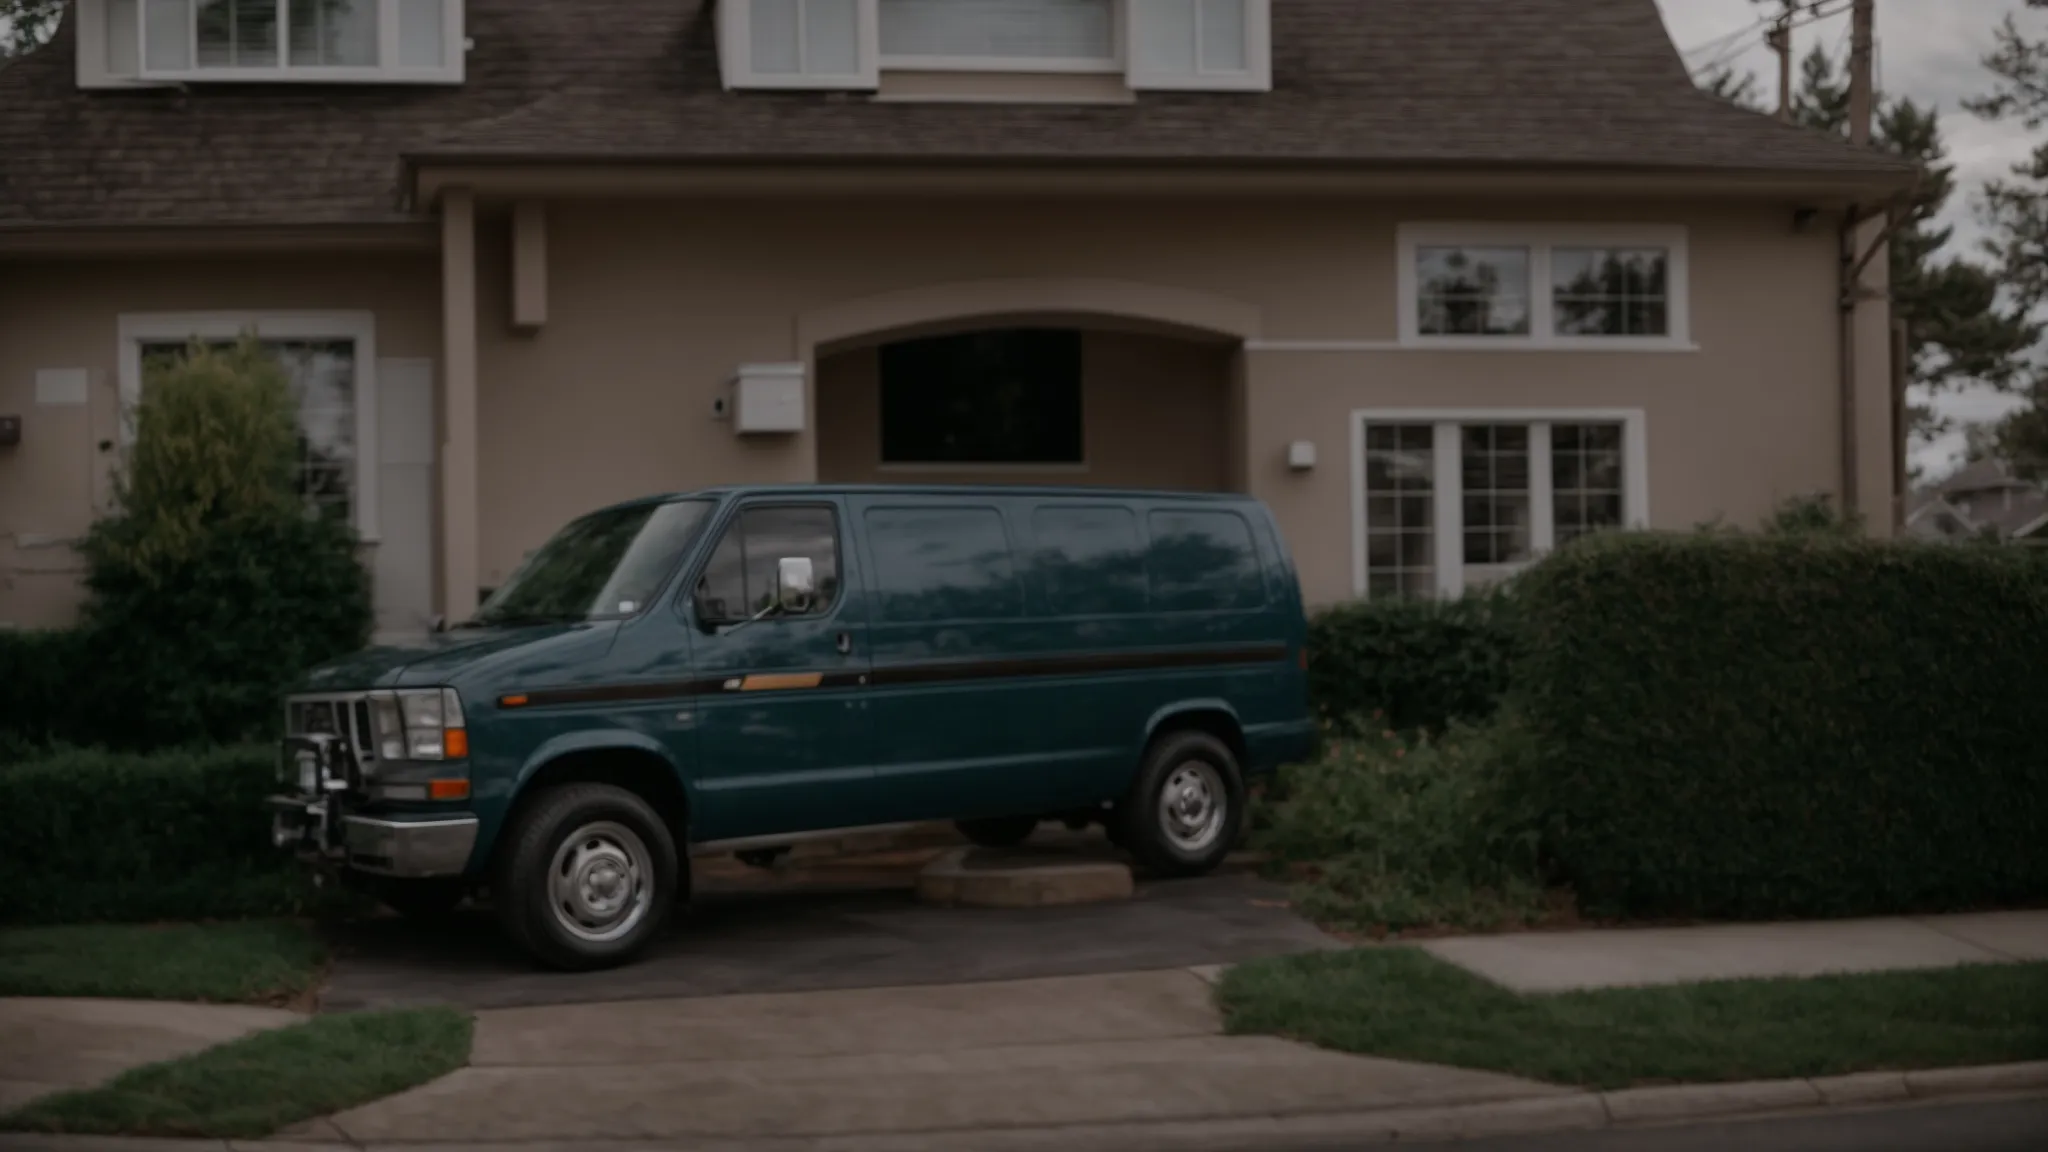 a service technician's van parked in a residential driveway, signaling local service availability.